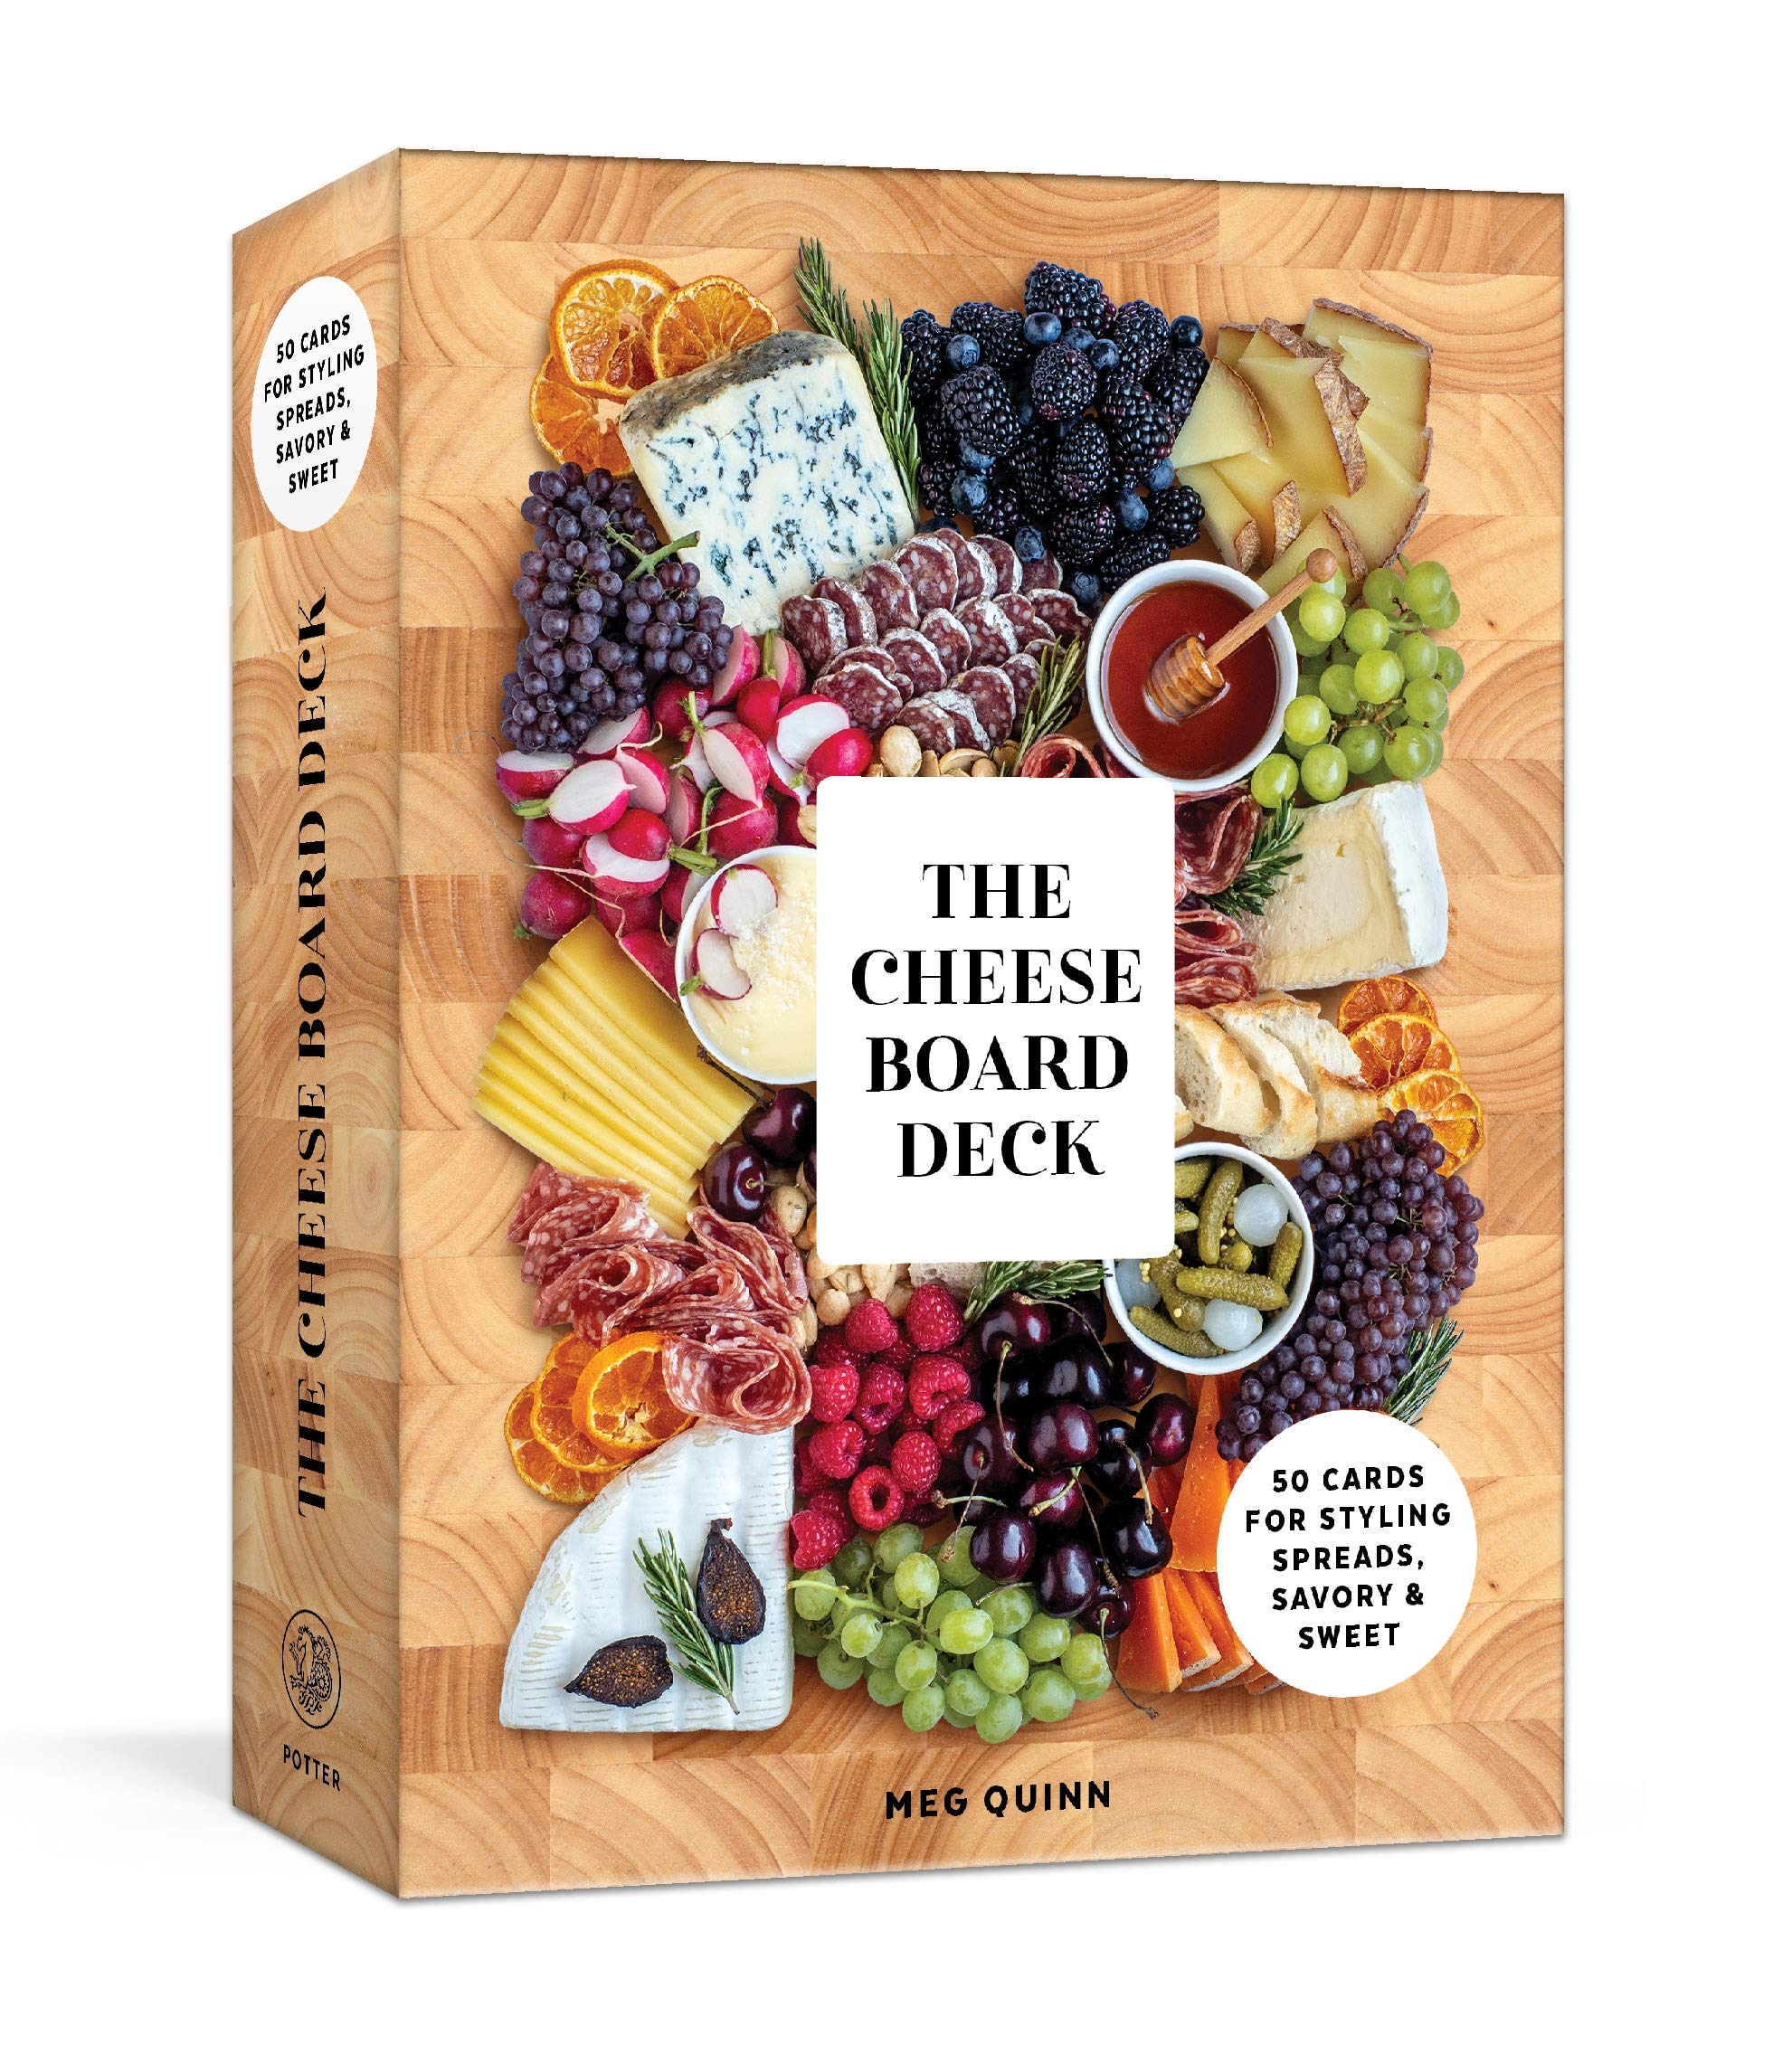 The Cheese Board Deck: 50 Cards for Styling Spreads, Savory + Sweet